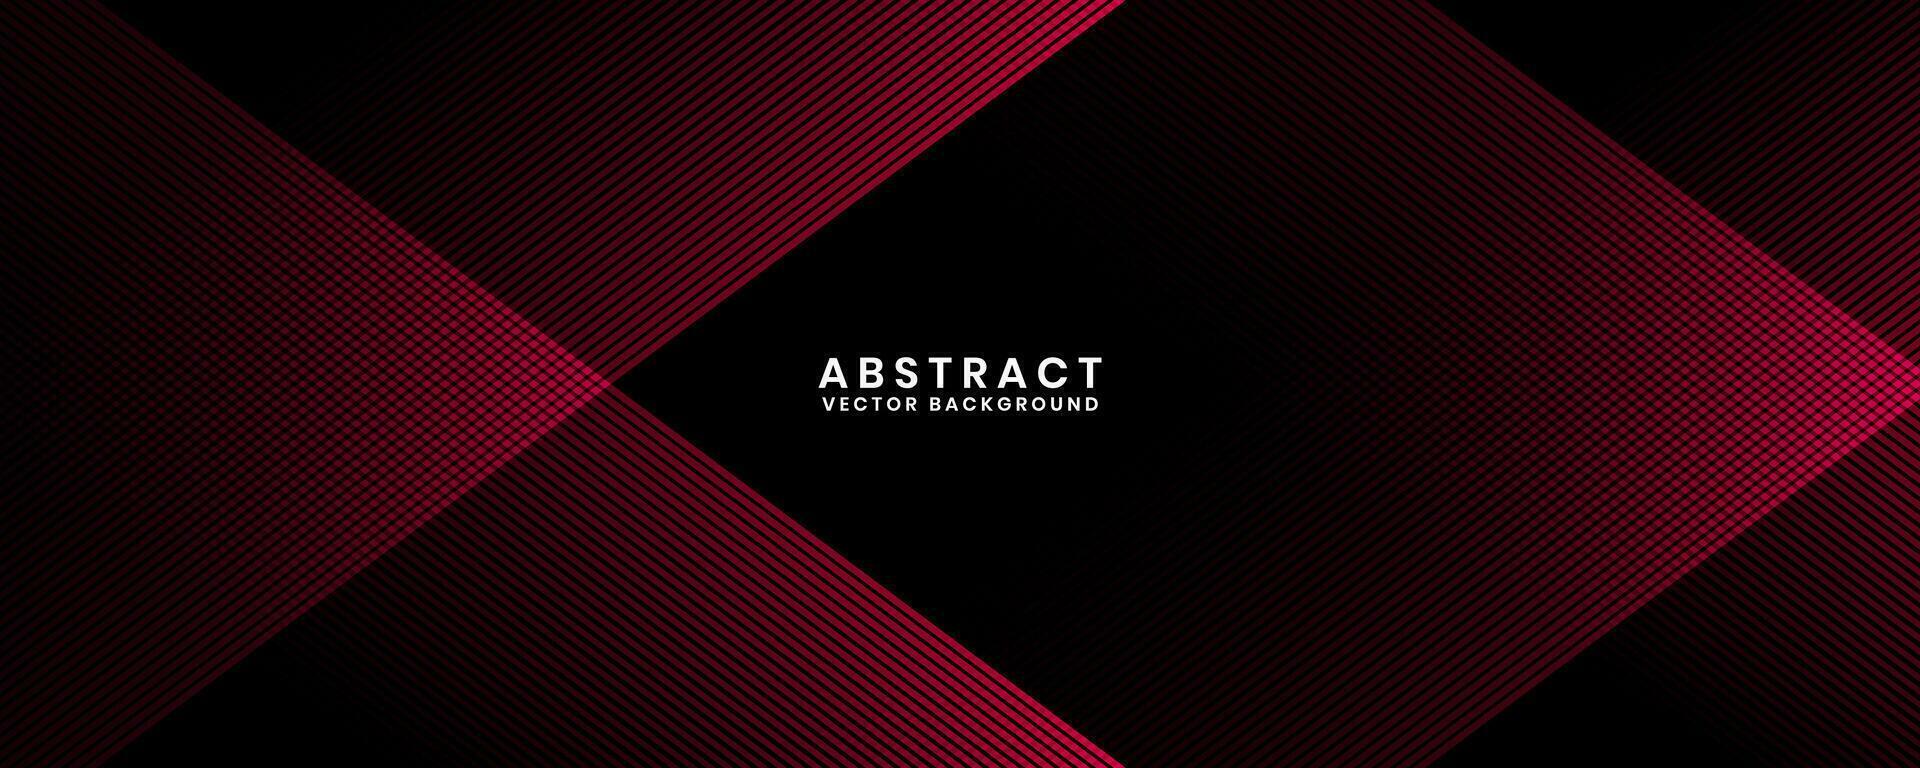 3D red techno abstract background overlap layer on dark space with glowing lines effect decoration. Modern graphic design element future style concept for banner, flyer, card, or brochure cover vector